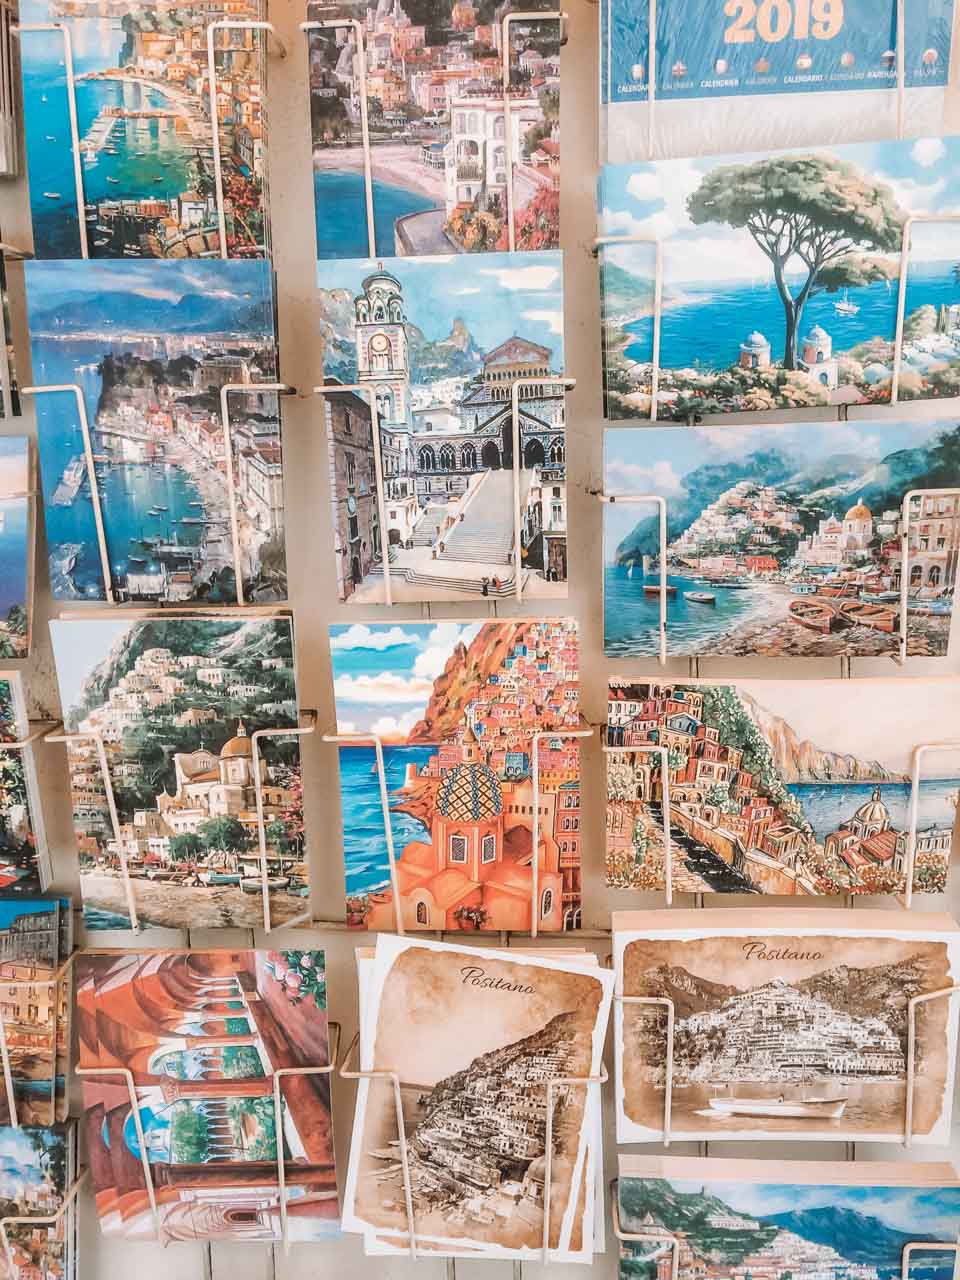 Various hand-painted postcards on display in Positano, Italy